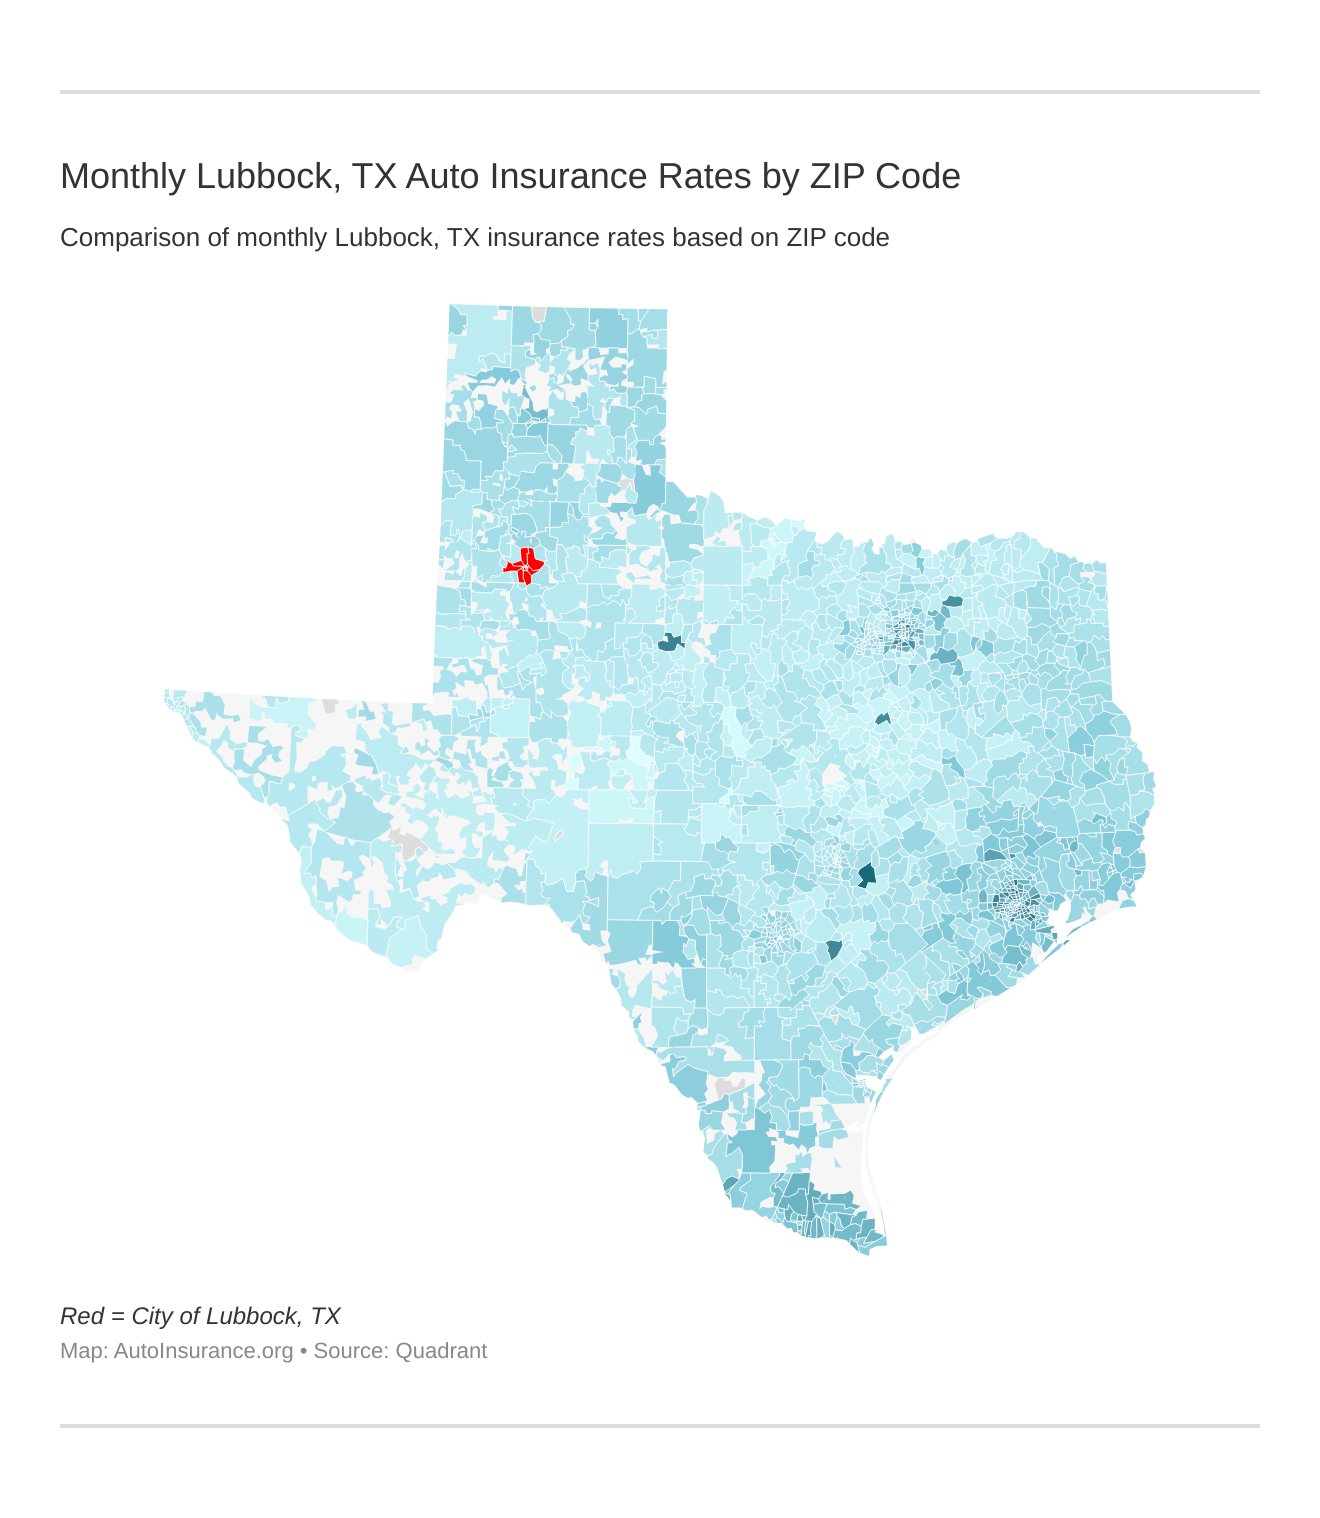 Monthly Lubbock, TX Auto Insurance Rates by ZIP Code